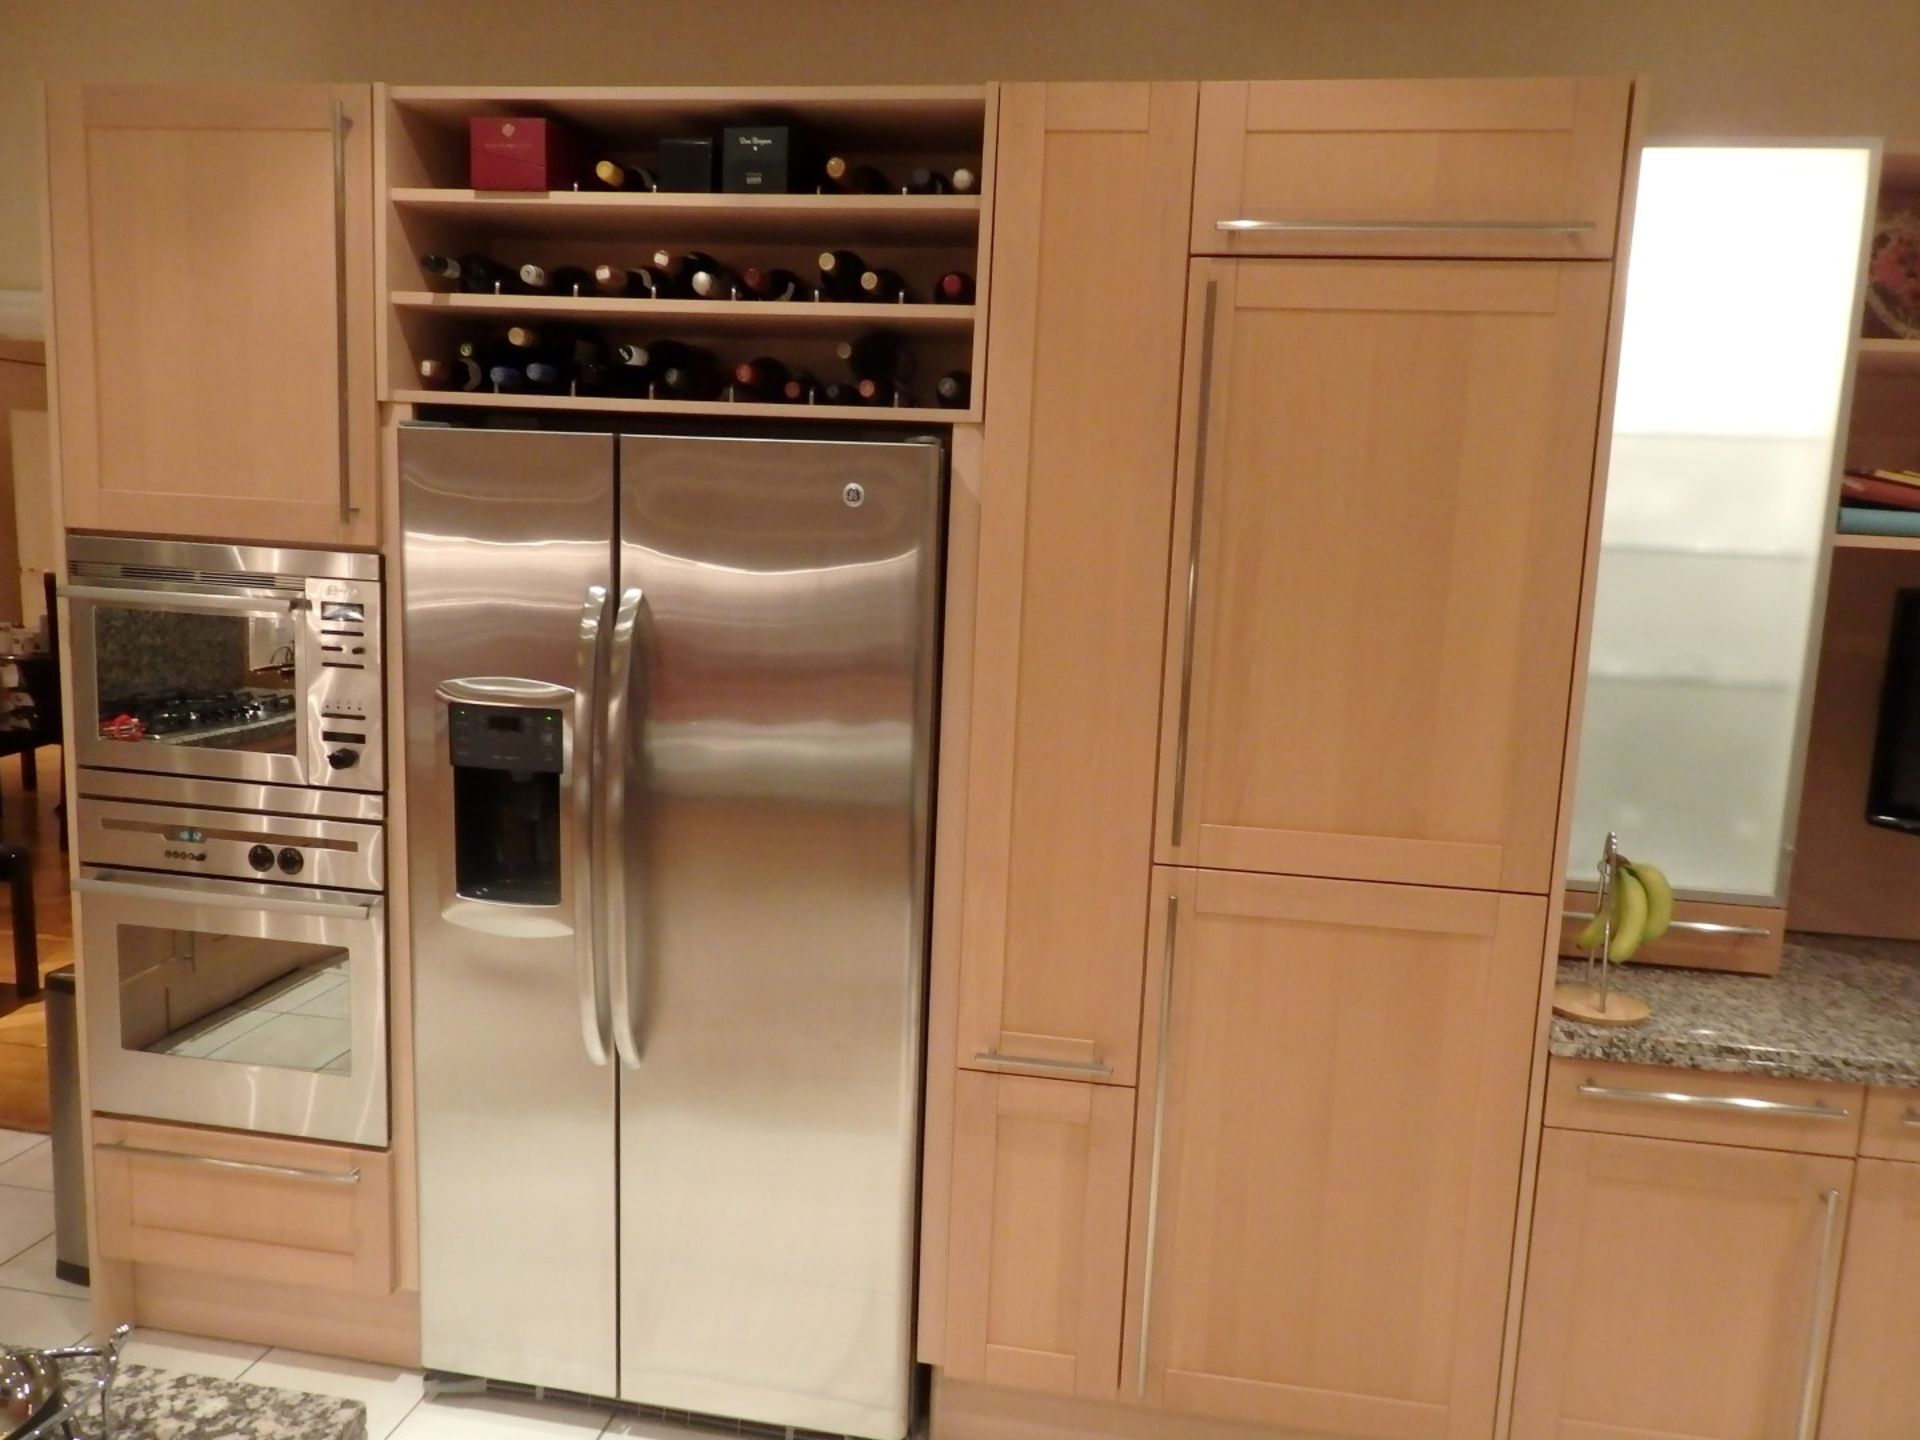 1 x Siematic Fitted Kitchen With Beech Shaker Style Doors, Granite Worktops, Central Island and - Image 95 of 151